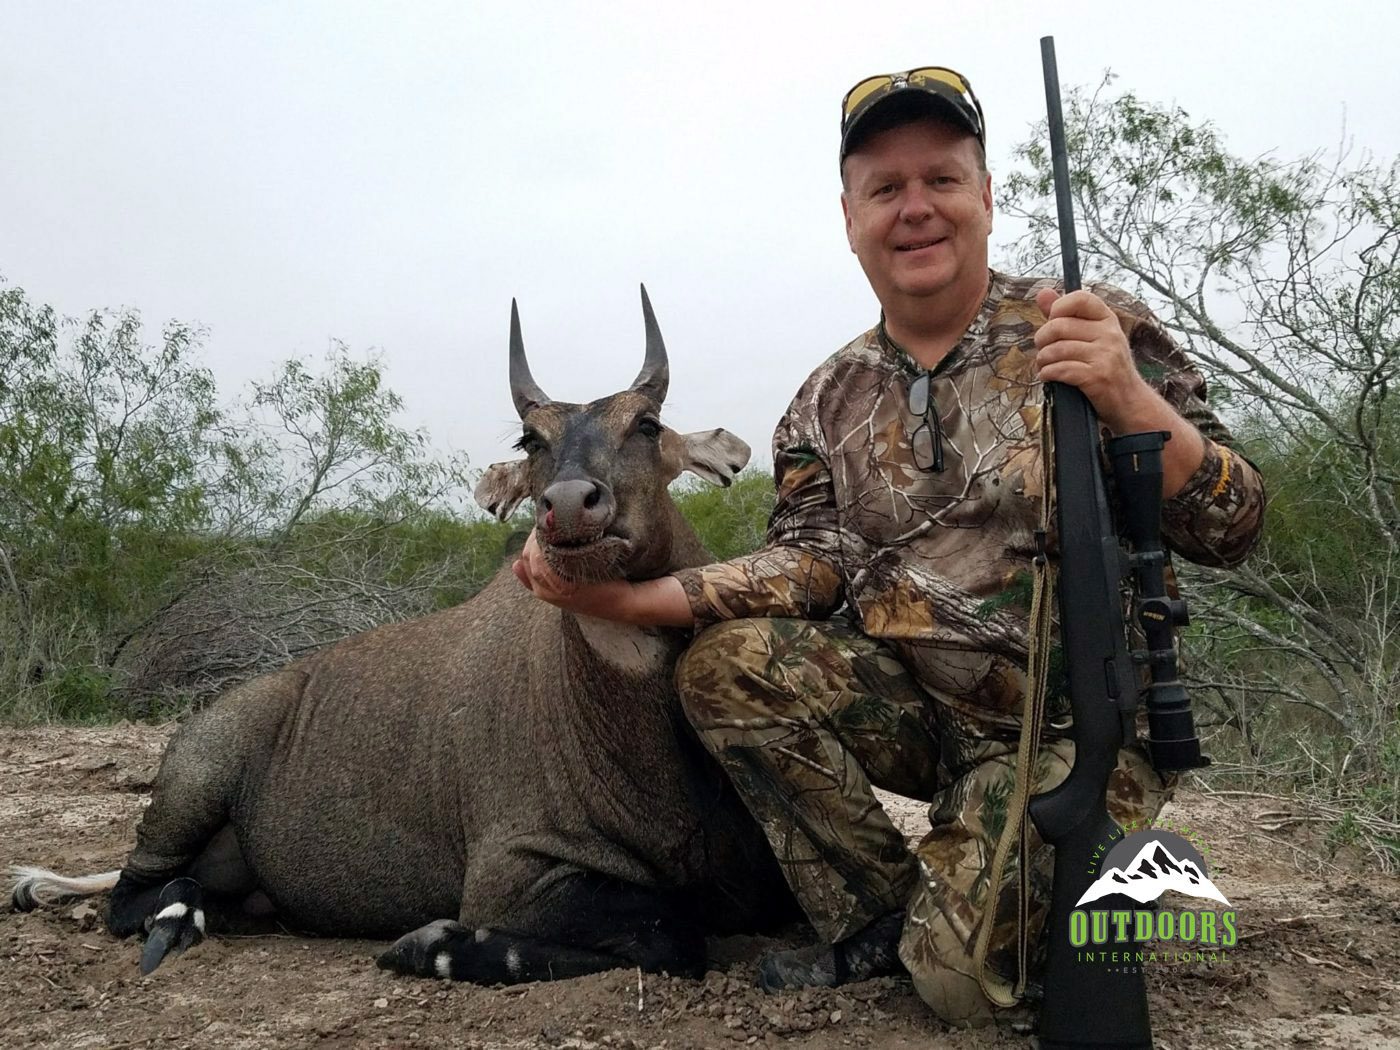 This Texas nilgai hunt is my second trip with OUTDOORS INTERNATIONAL and I will absolutely book more exotics hunting in the future.